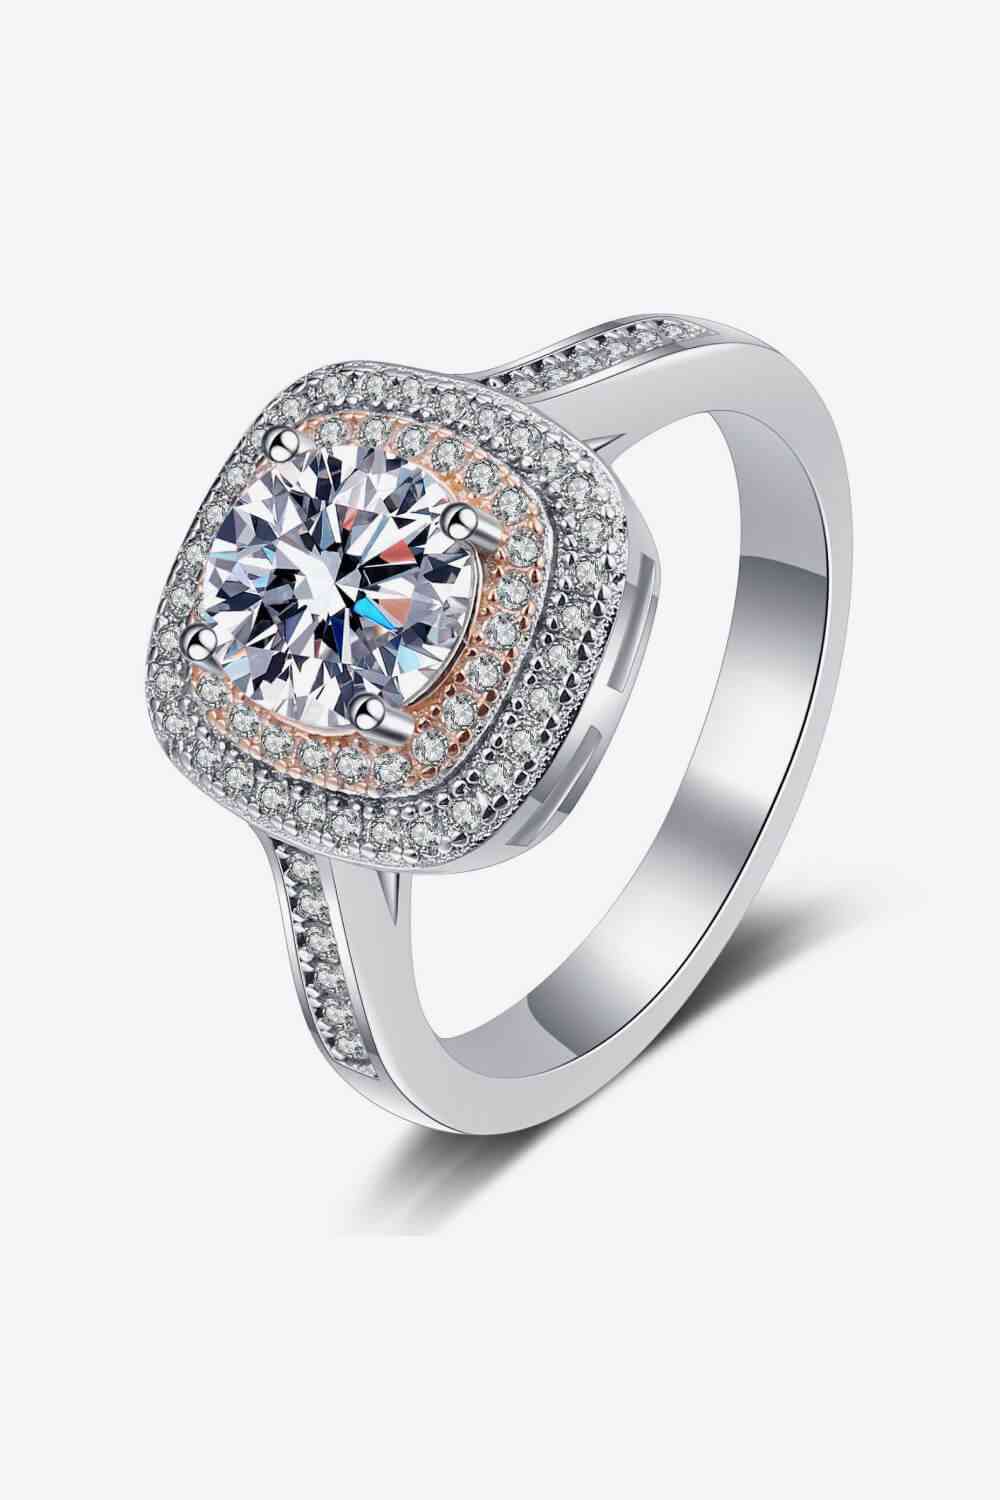 Need You Now 1 Carat Moissanite Ring